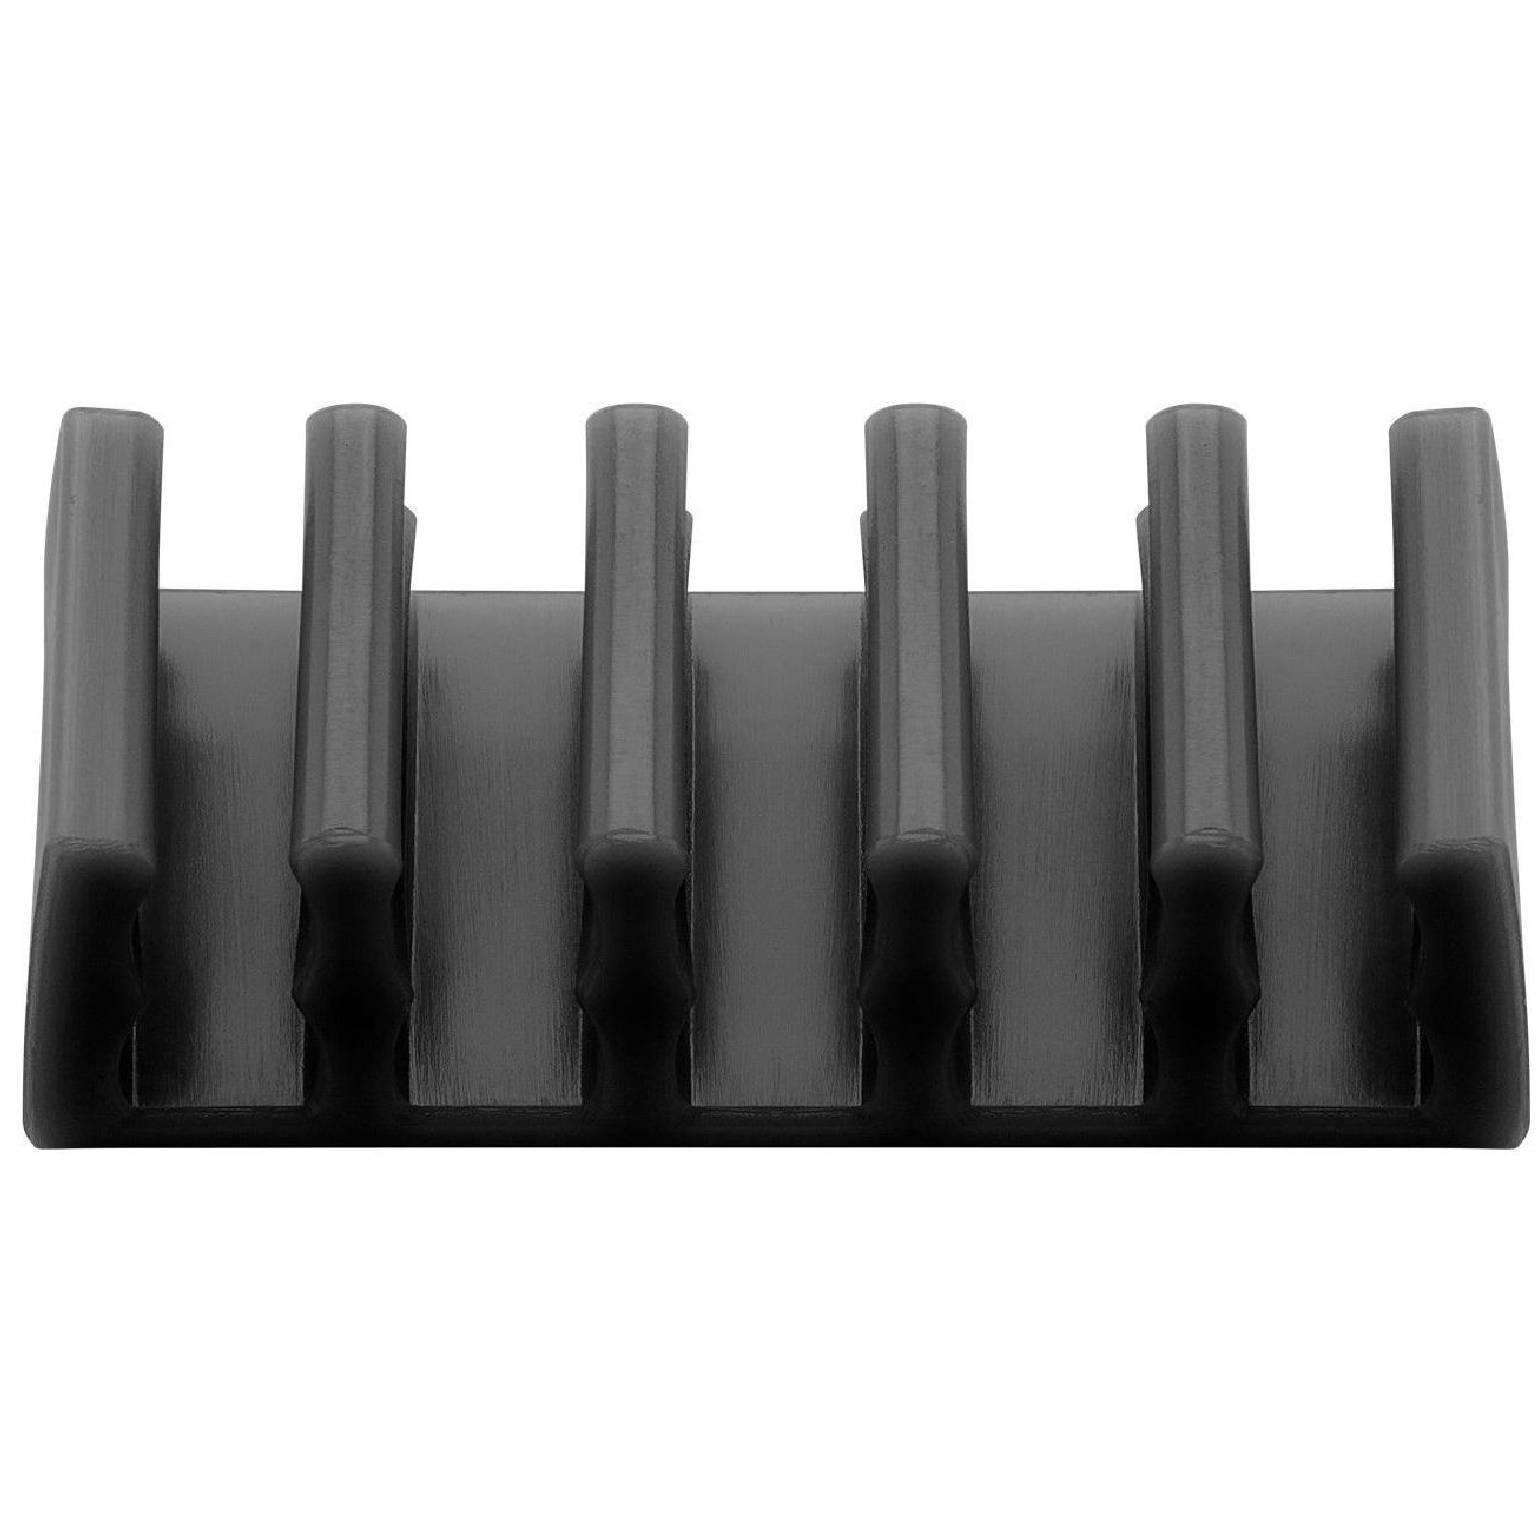 5-slot cable management, black 2-piece set for organising and attaching